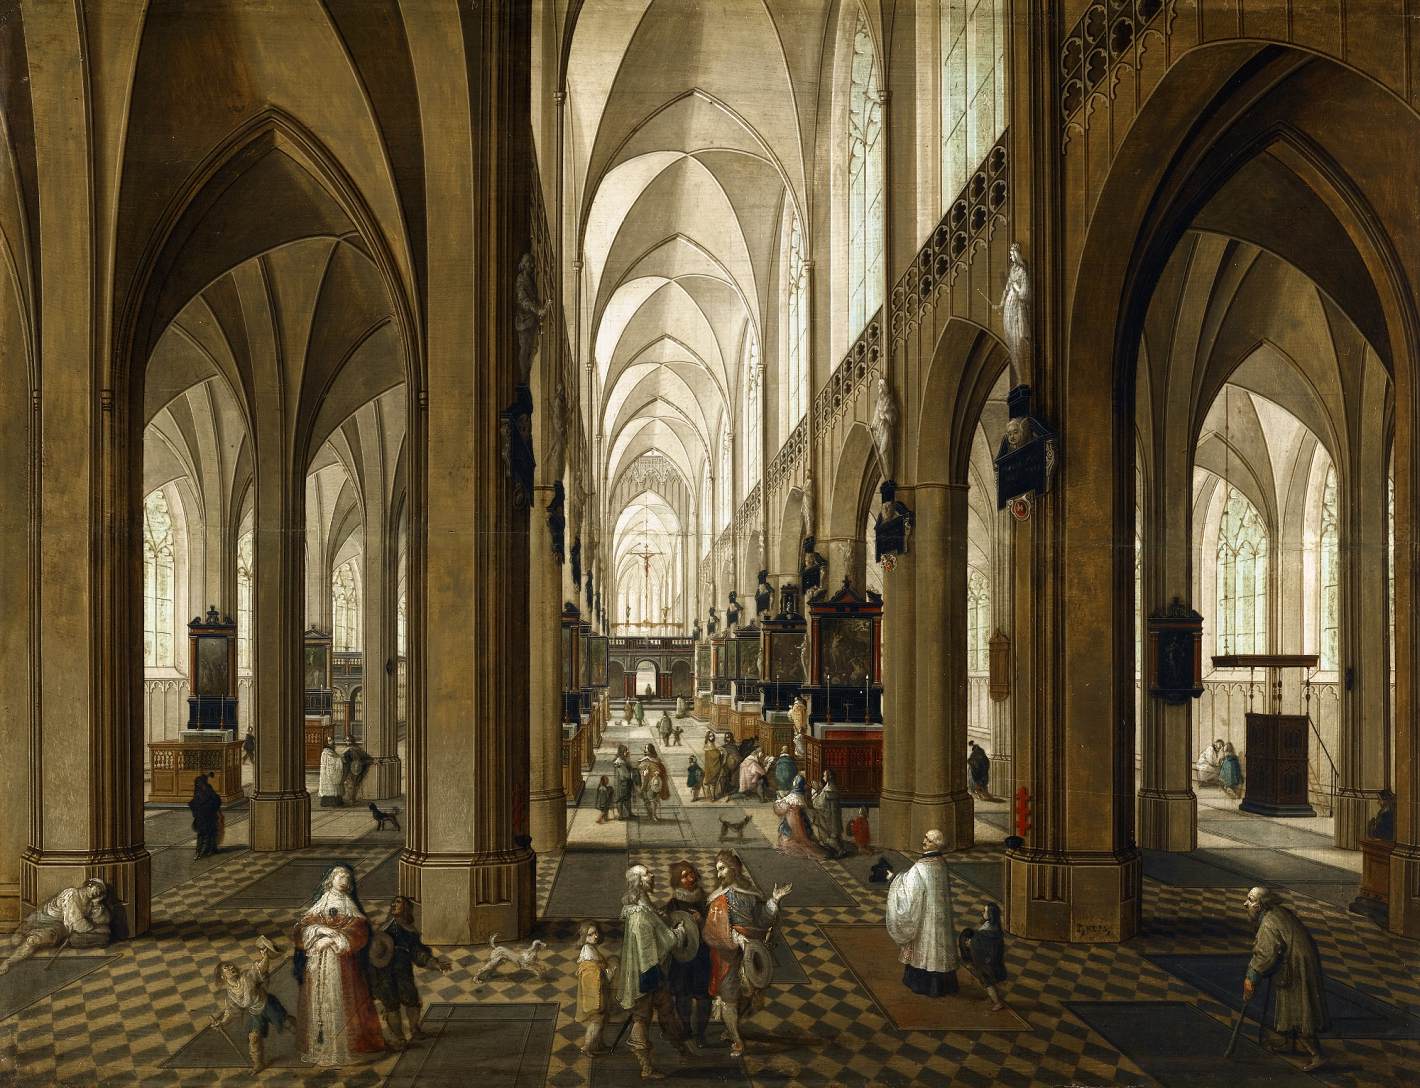 View of the Interior of the Antwerp Cathedral